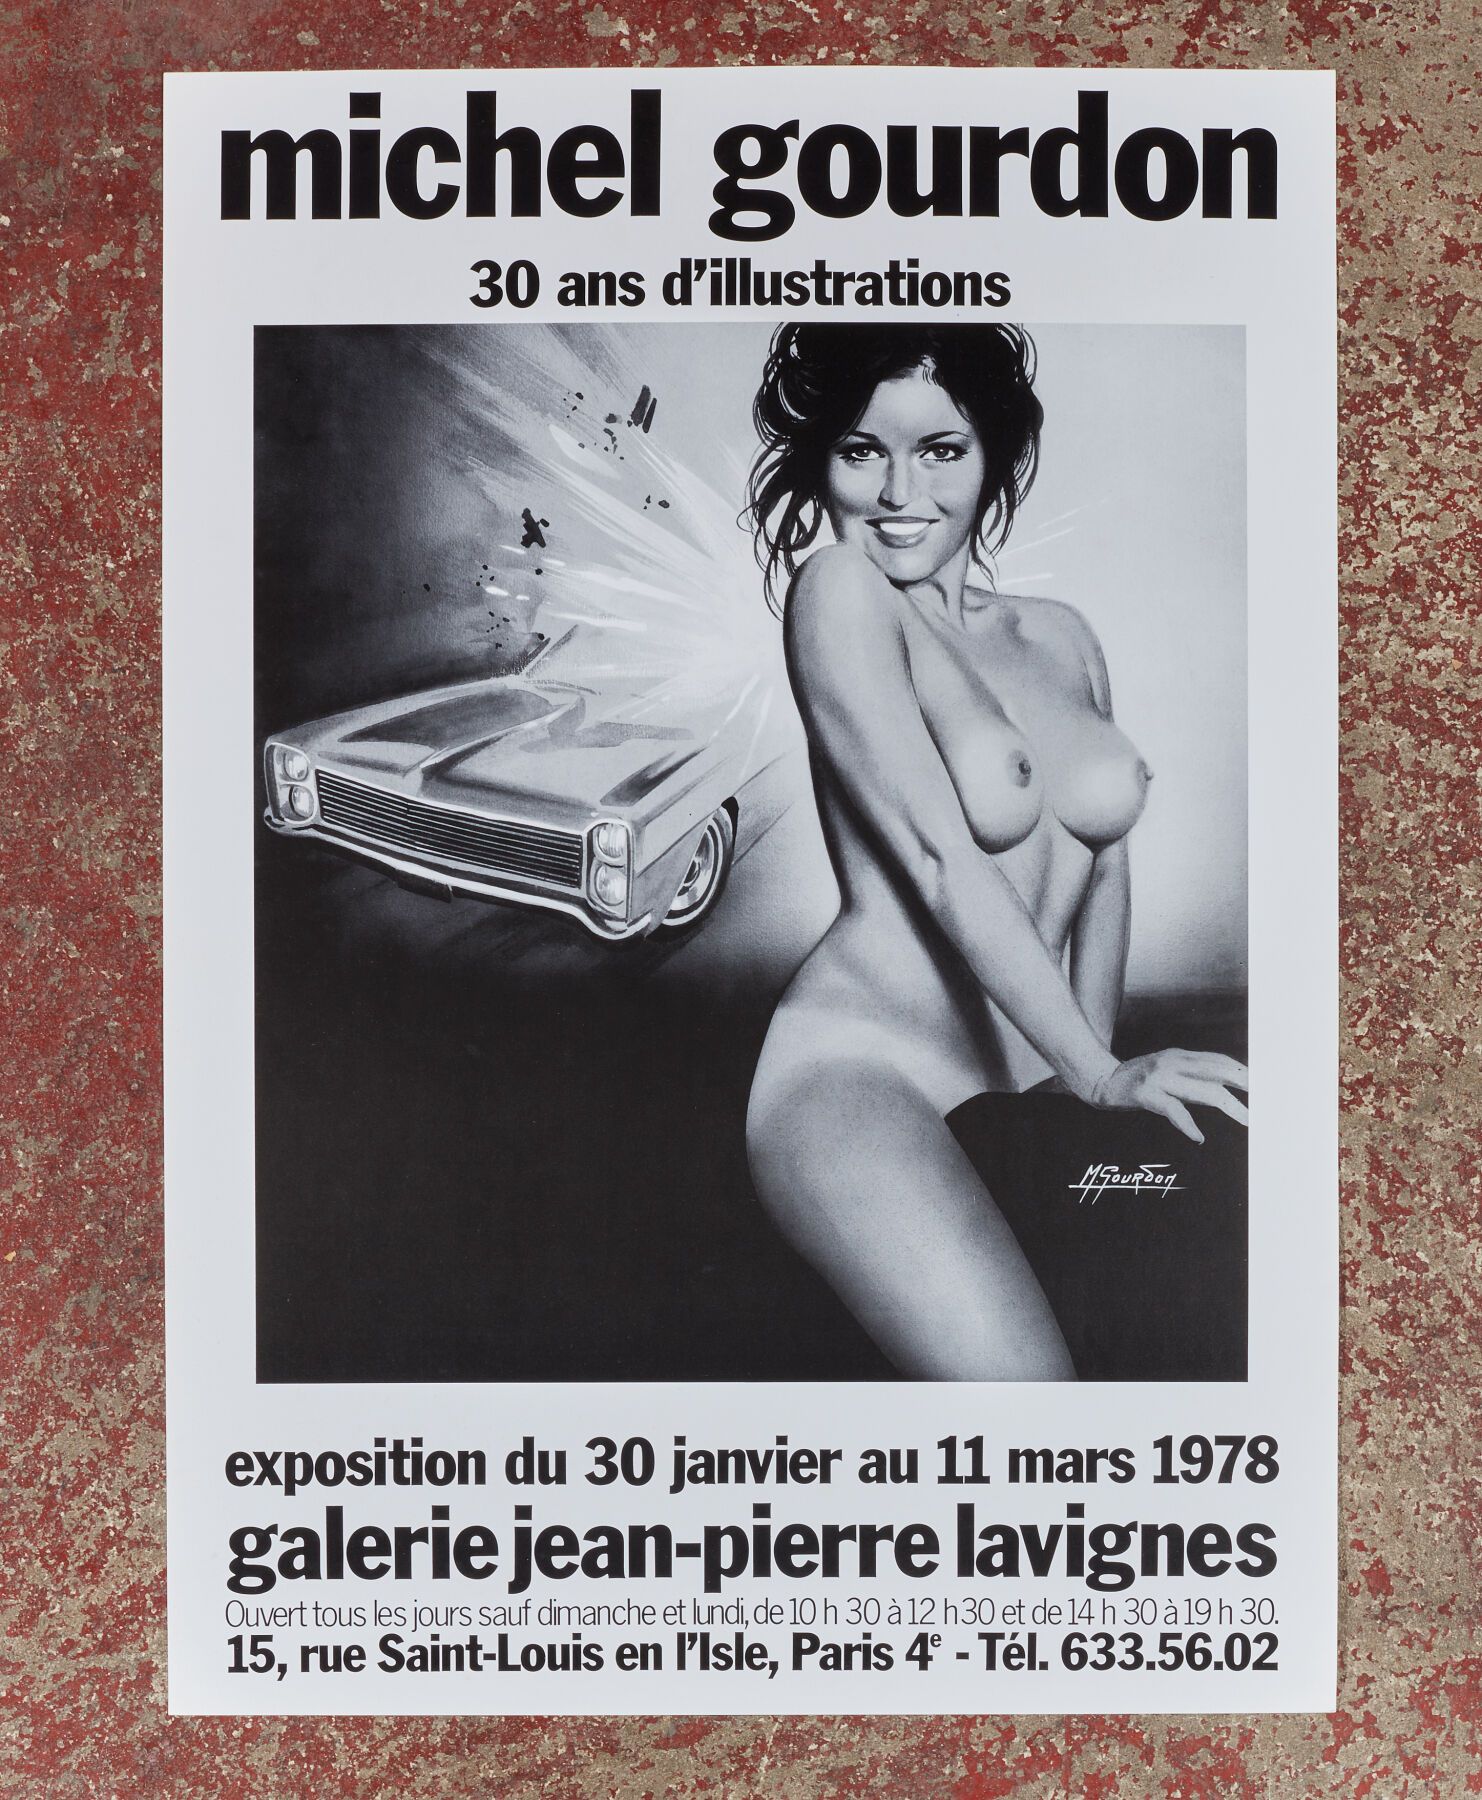 Null Michel GOURDON (1925 - 2011).
30 years of illustrations - 1978?
Poster for &hellip;